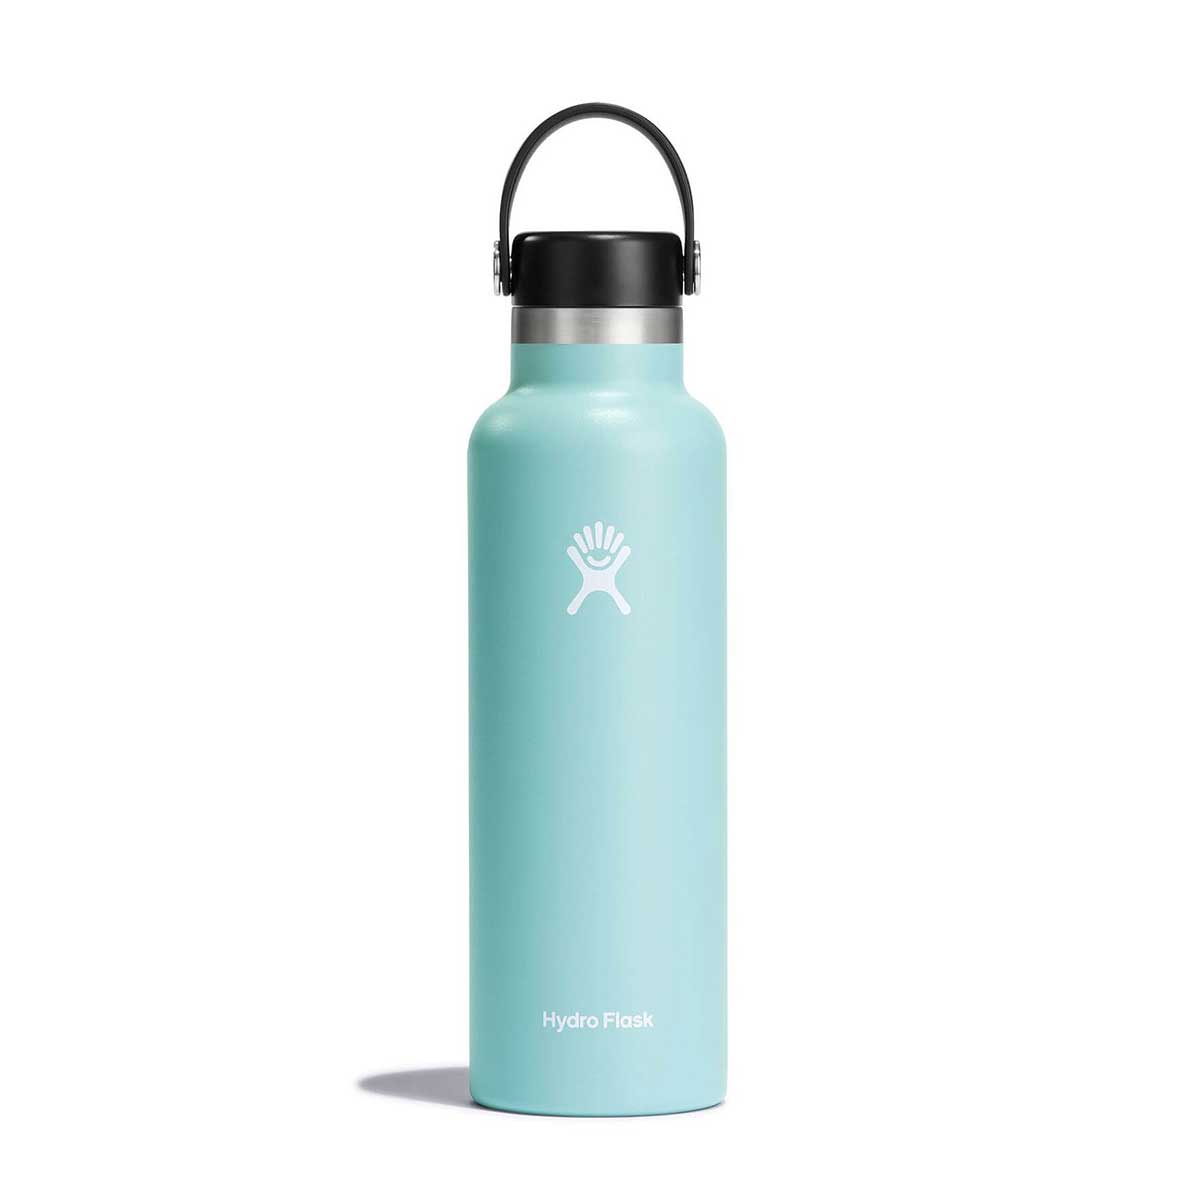 Hydro Flask Standard Mouth Insulated Water Bottle with Flex Cap 21 oz in Dew